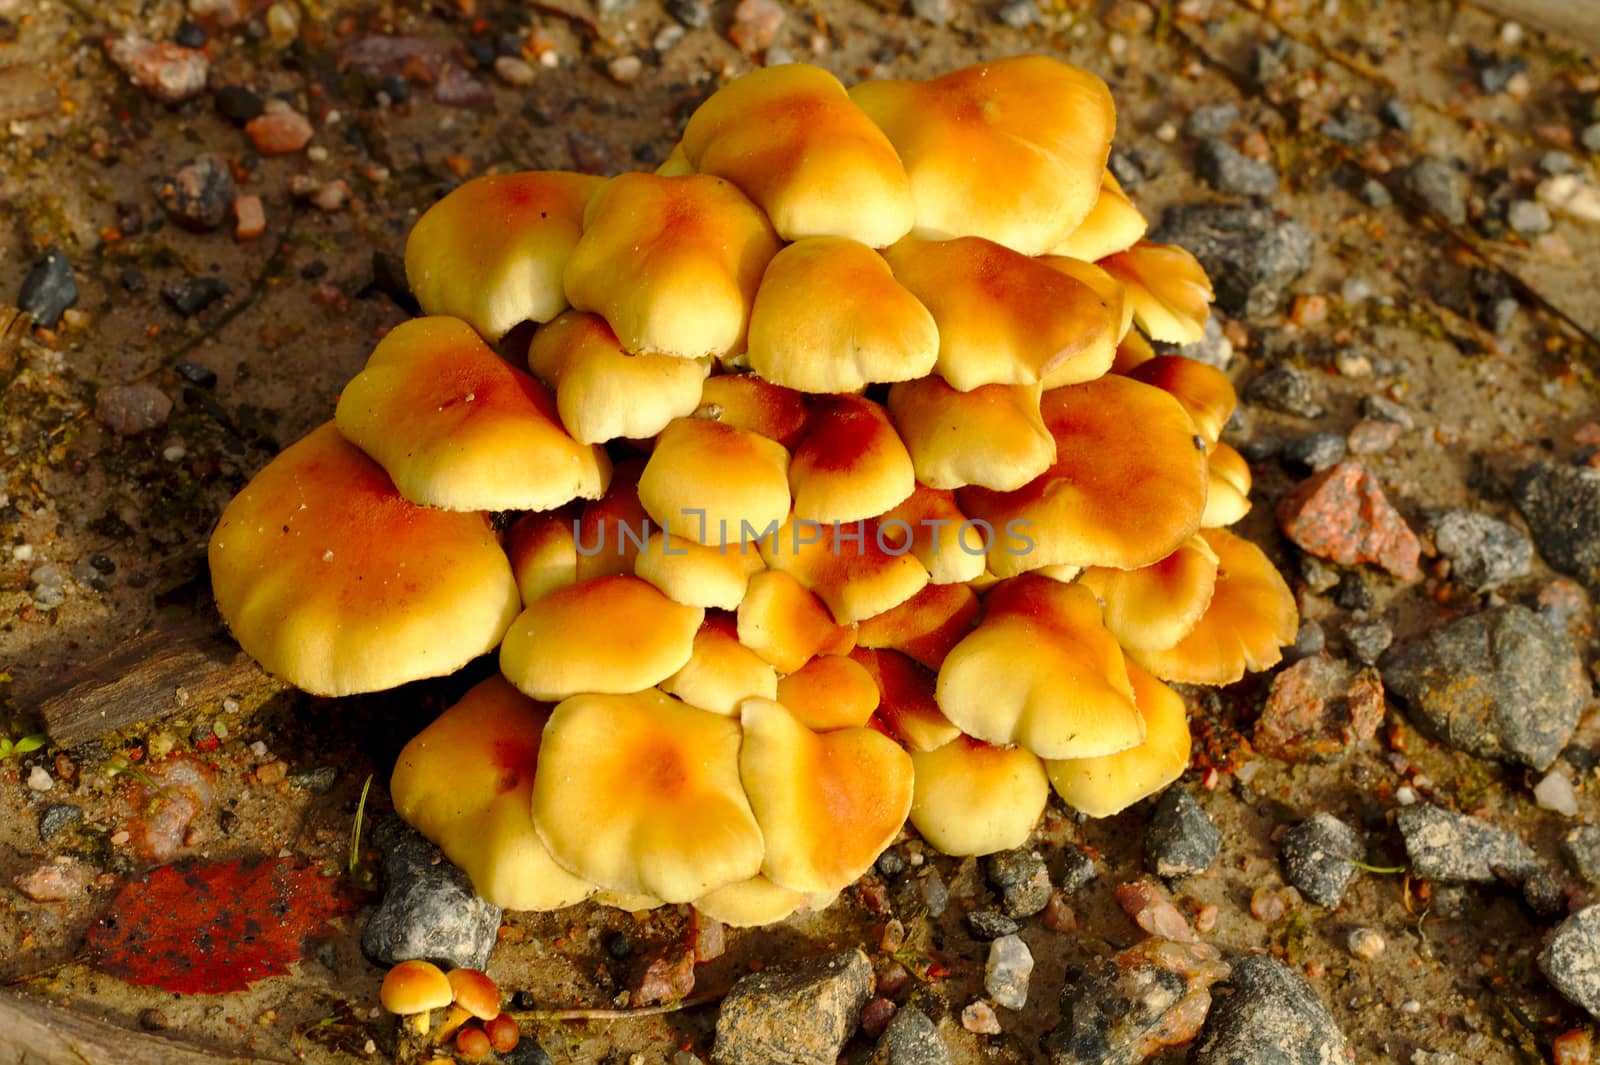 Bunch of colorful mushrooms growing together in a group.